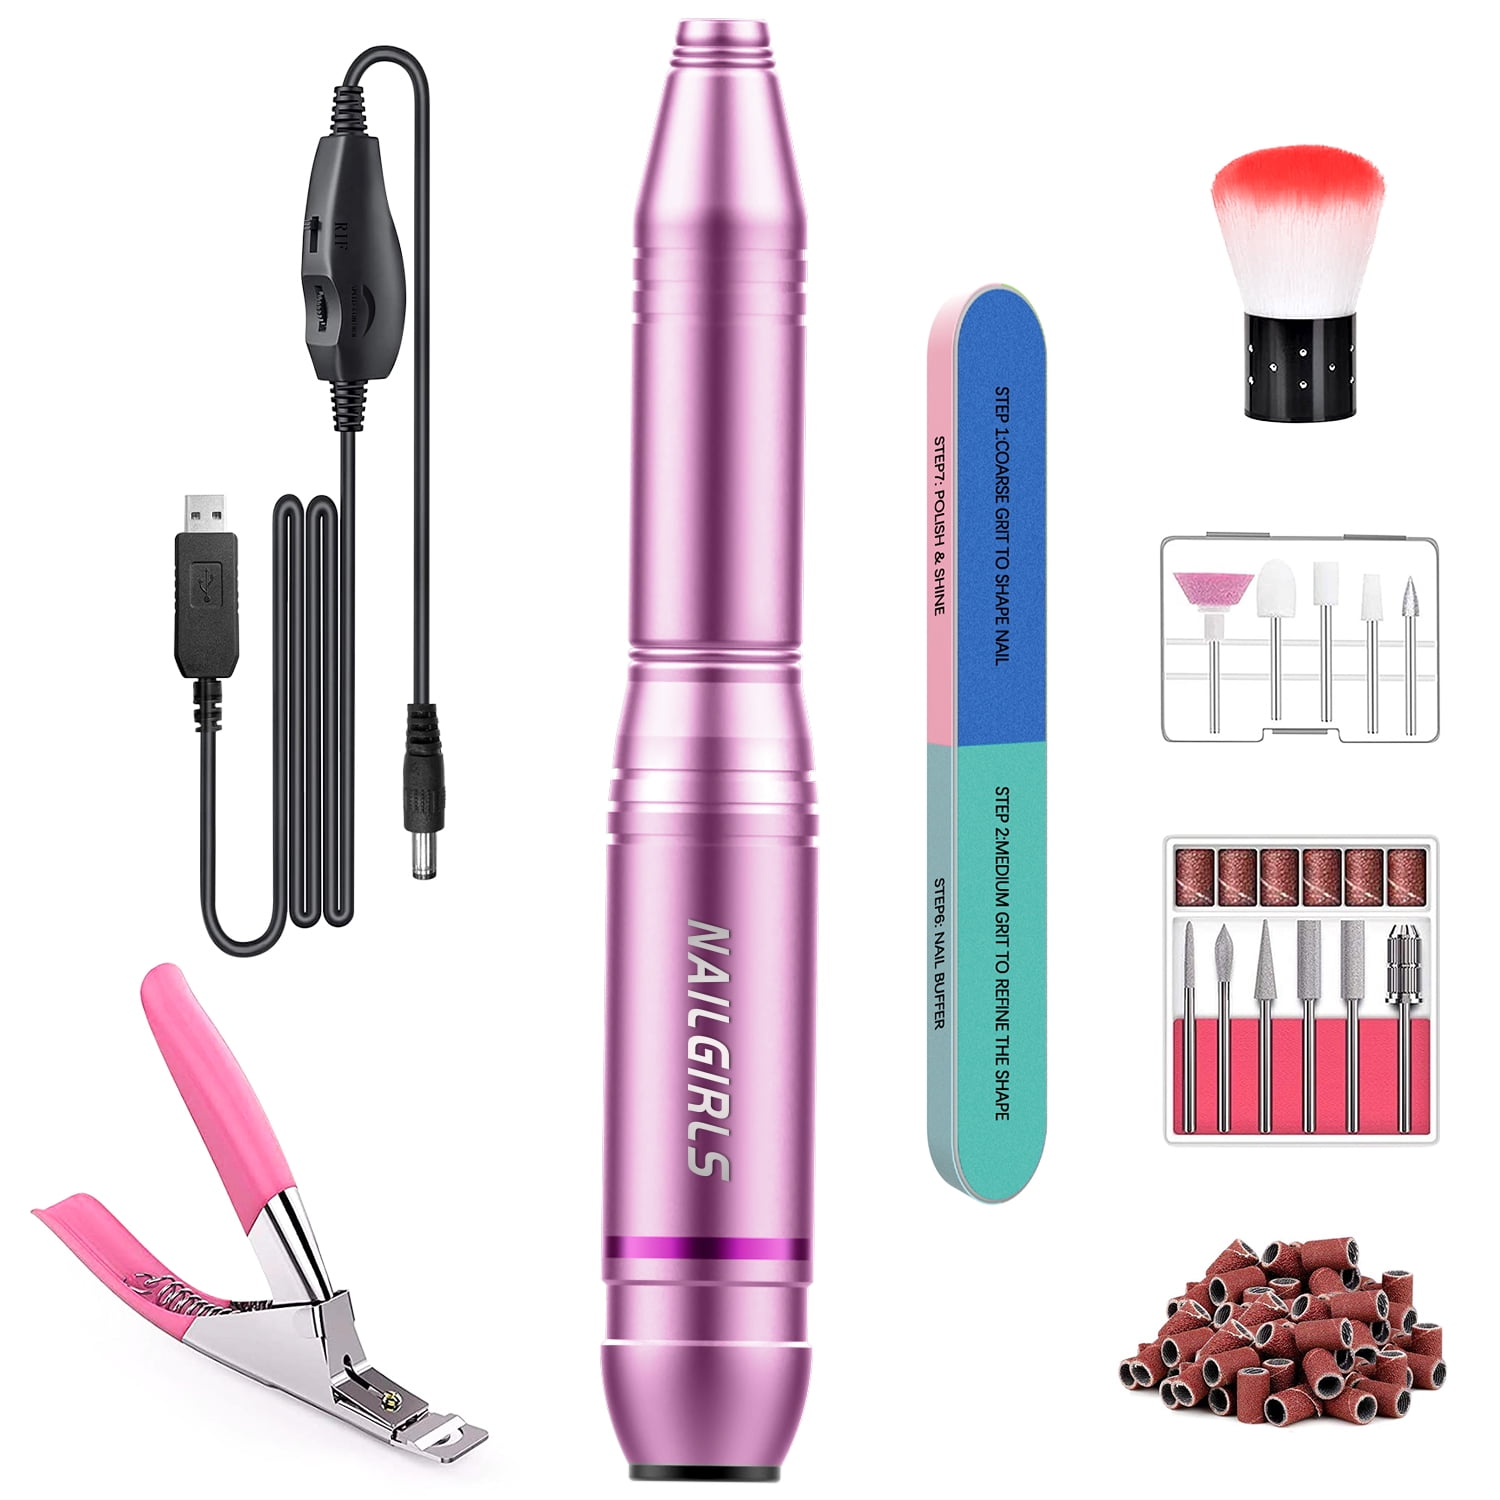 Nail Drills For Acrylic Nails Professional Electric Nail Drill Machine, Electric  Manicure Set Acrylic Nail Kit Portable USB Charge Electric Nail File,Nail  Grinder Manicure,Nail File Champagne Nail Drill